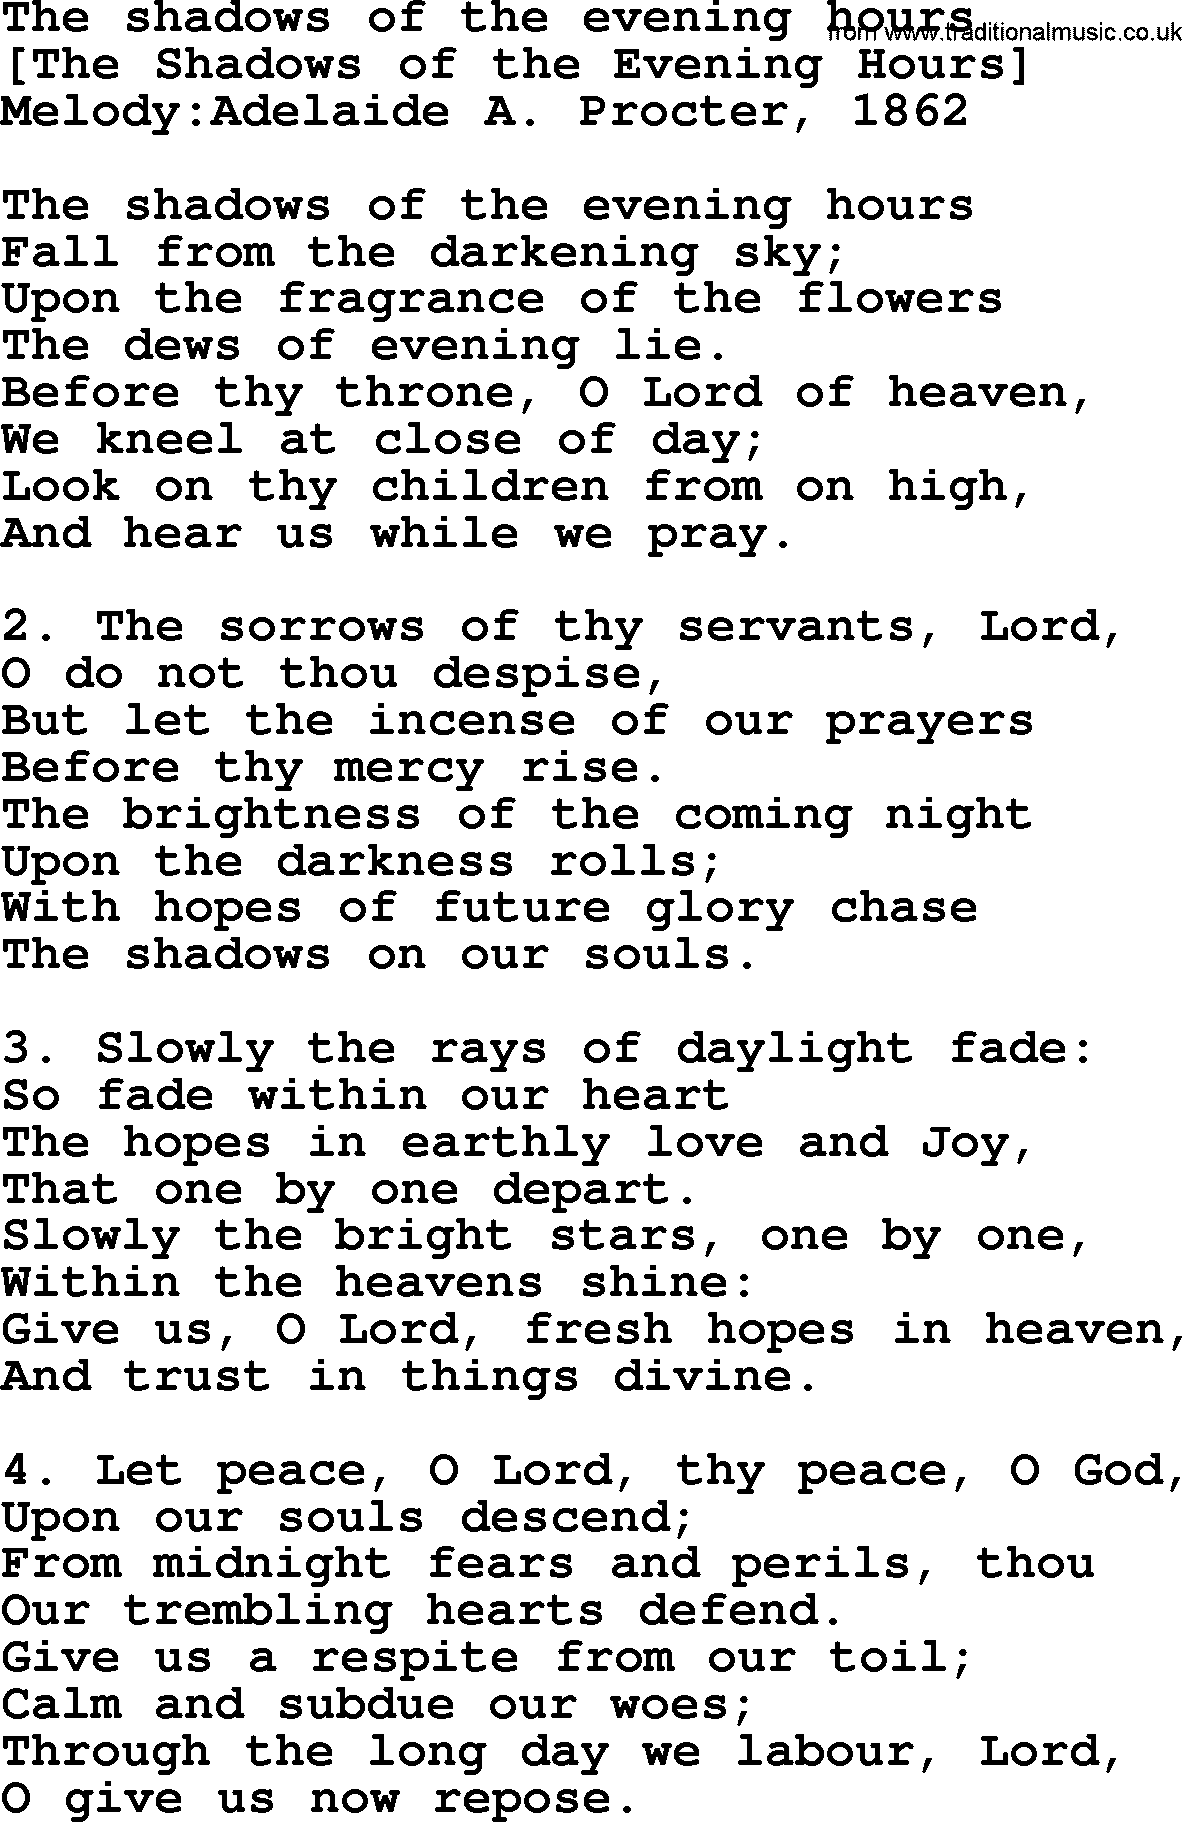 Old English Song: The Shadows Of The Evening Hours lyrics